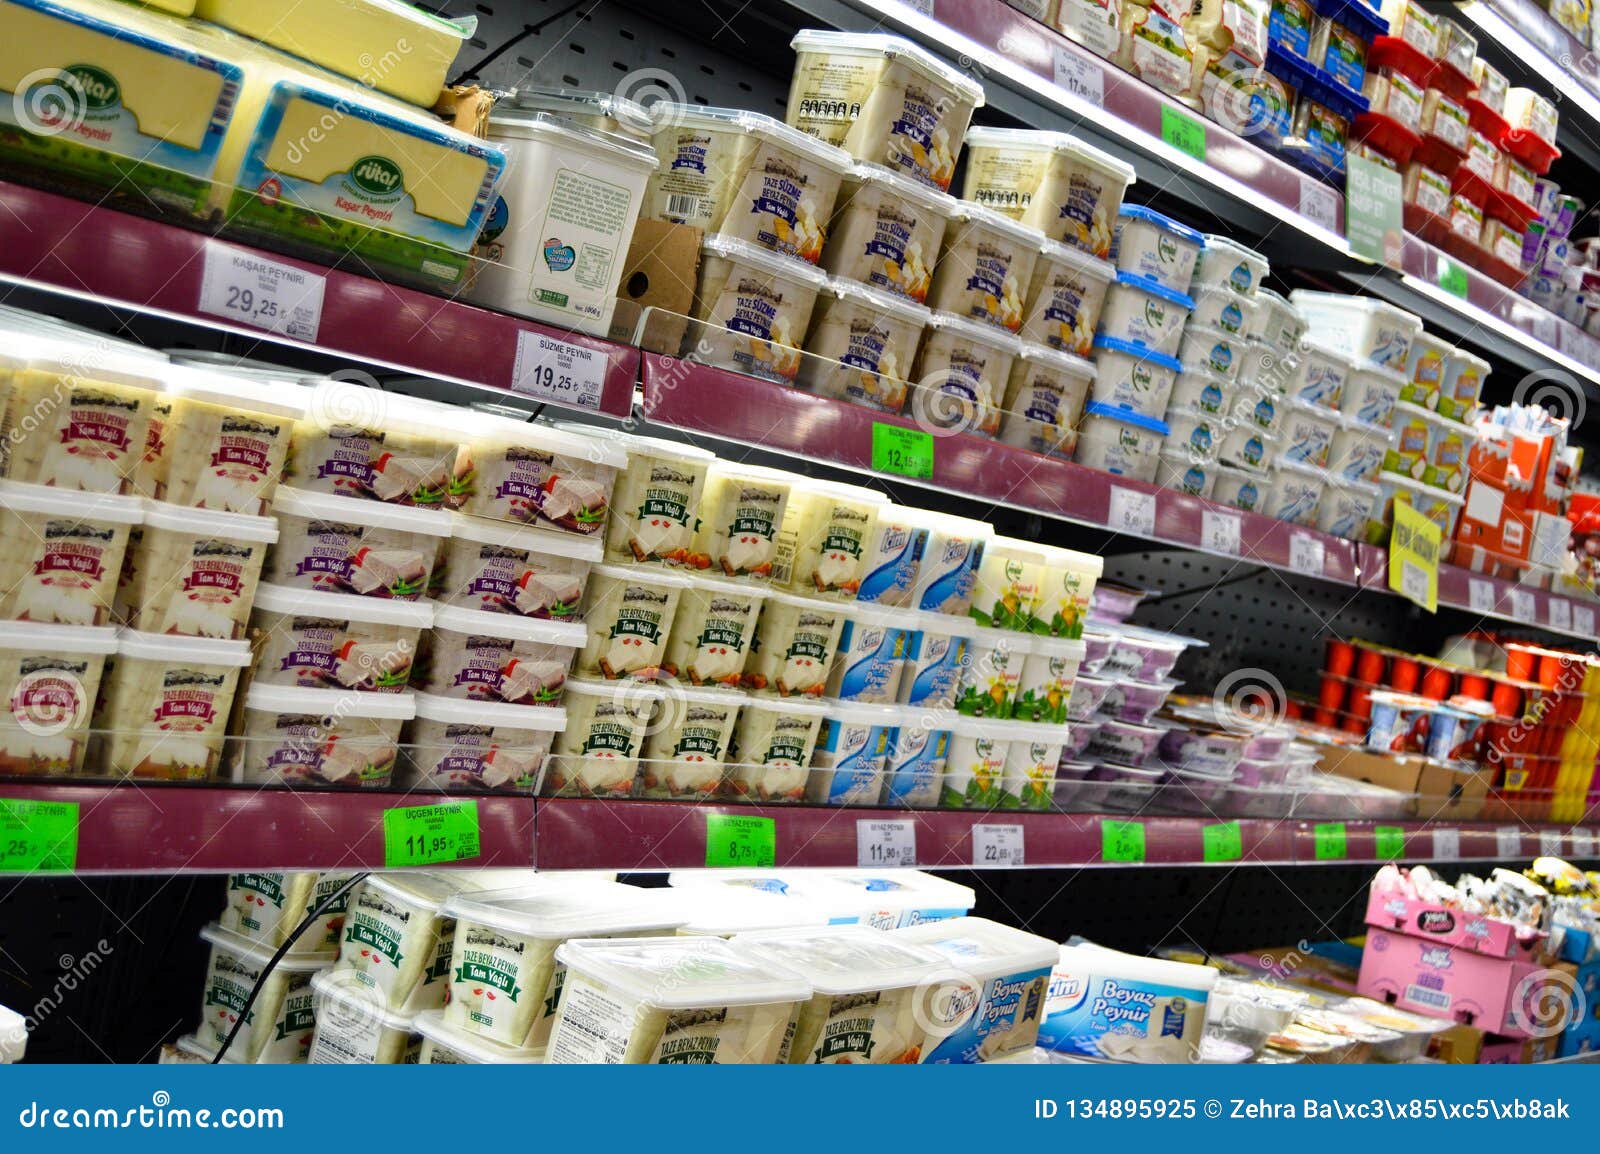 file market istanbul maltepe people shopping editorial image image of cart cheese 134895925